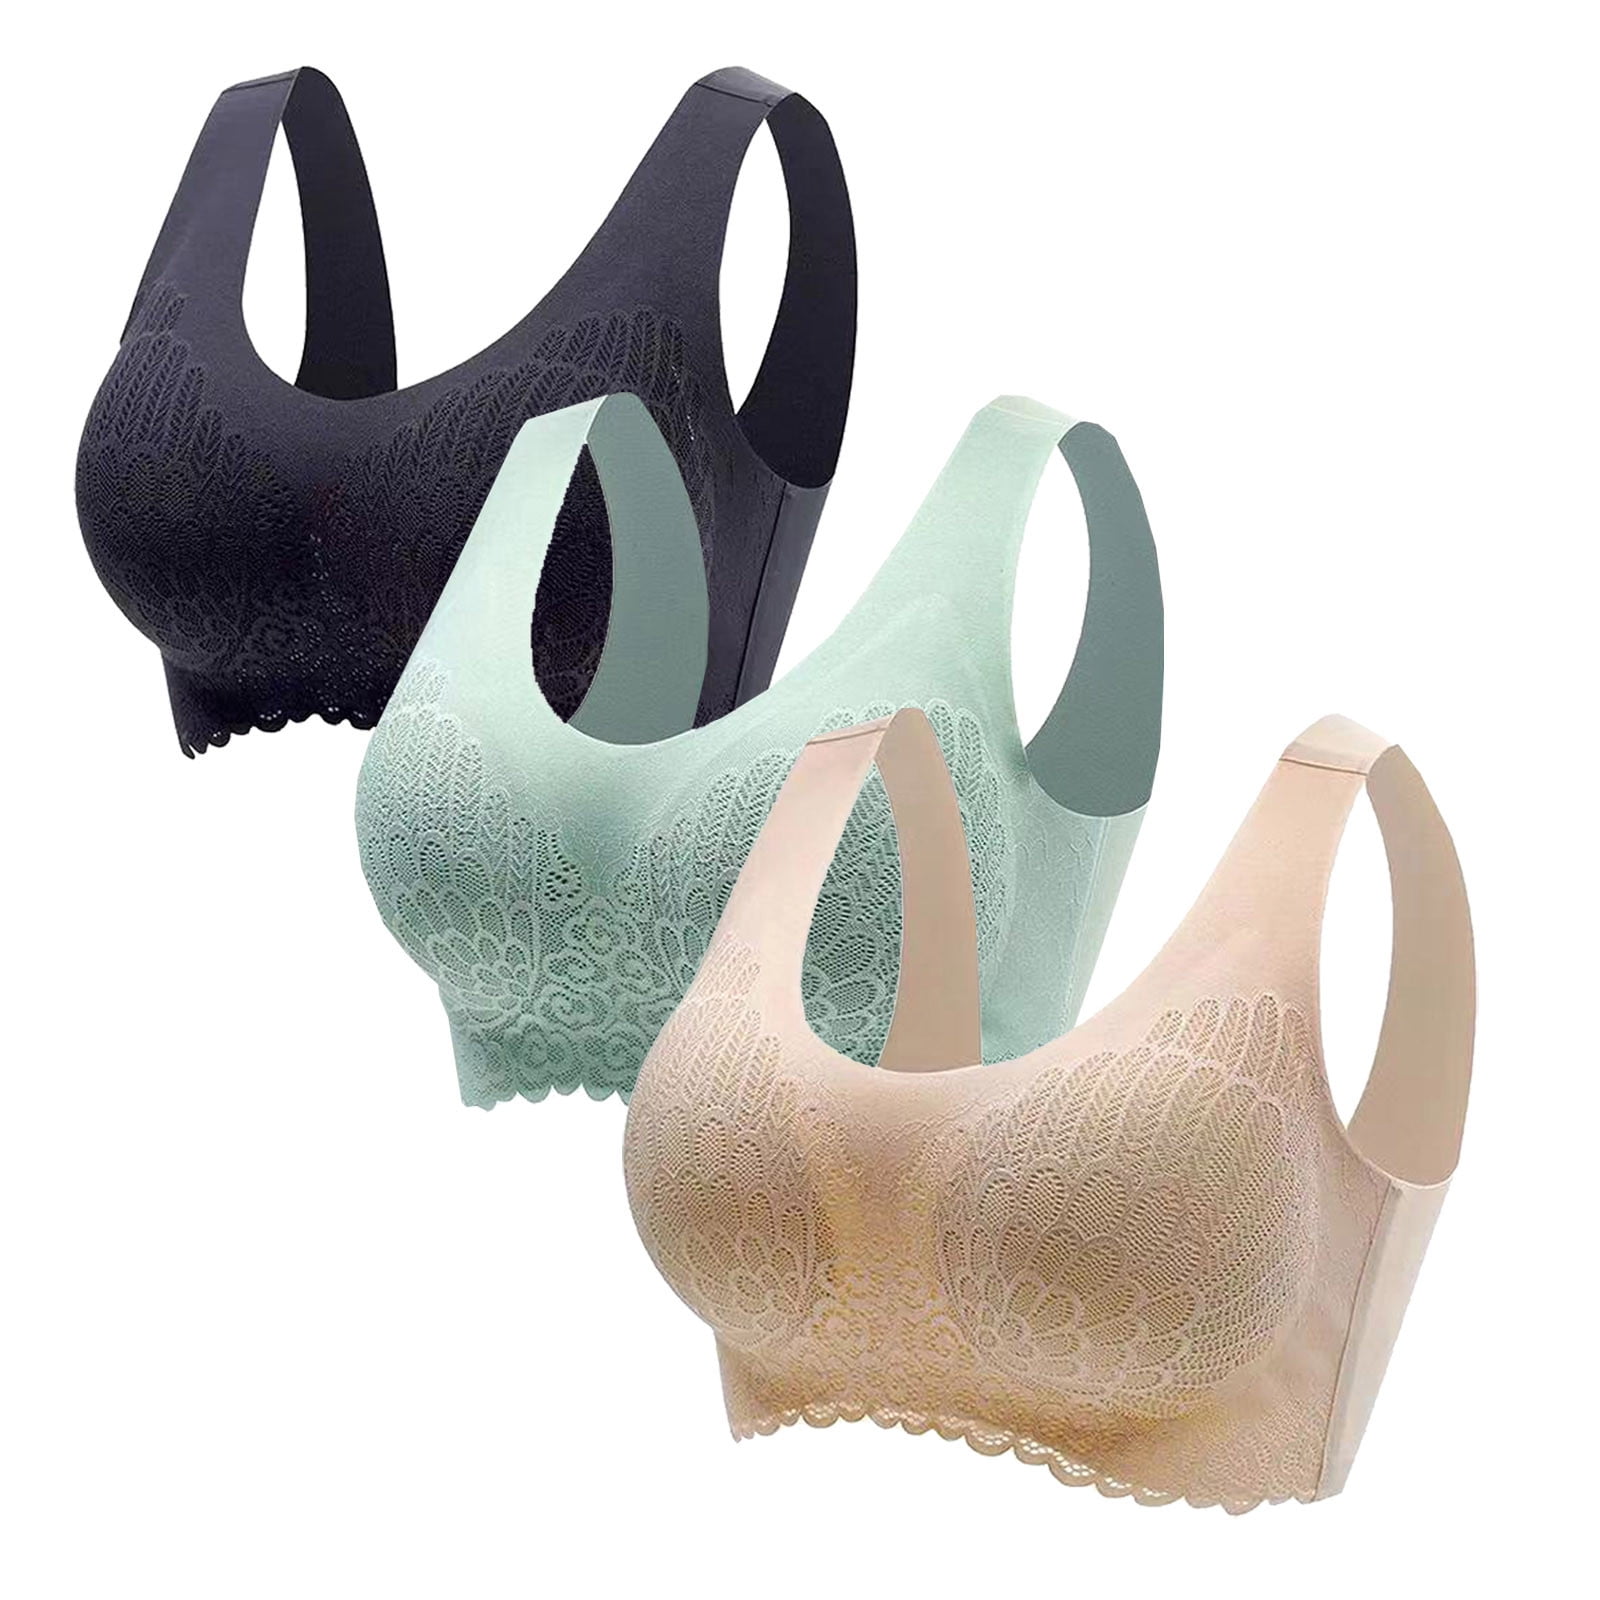 FAFWYP 3-Pack Plus Size Sports Bras for Women, Large Bust High